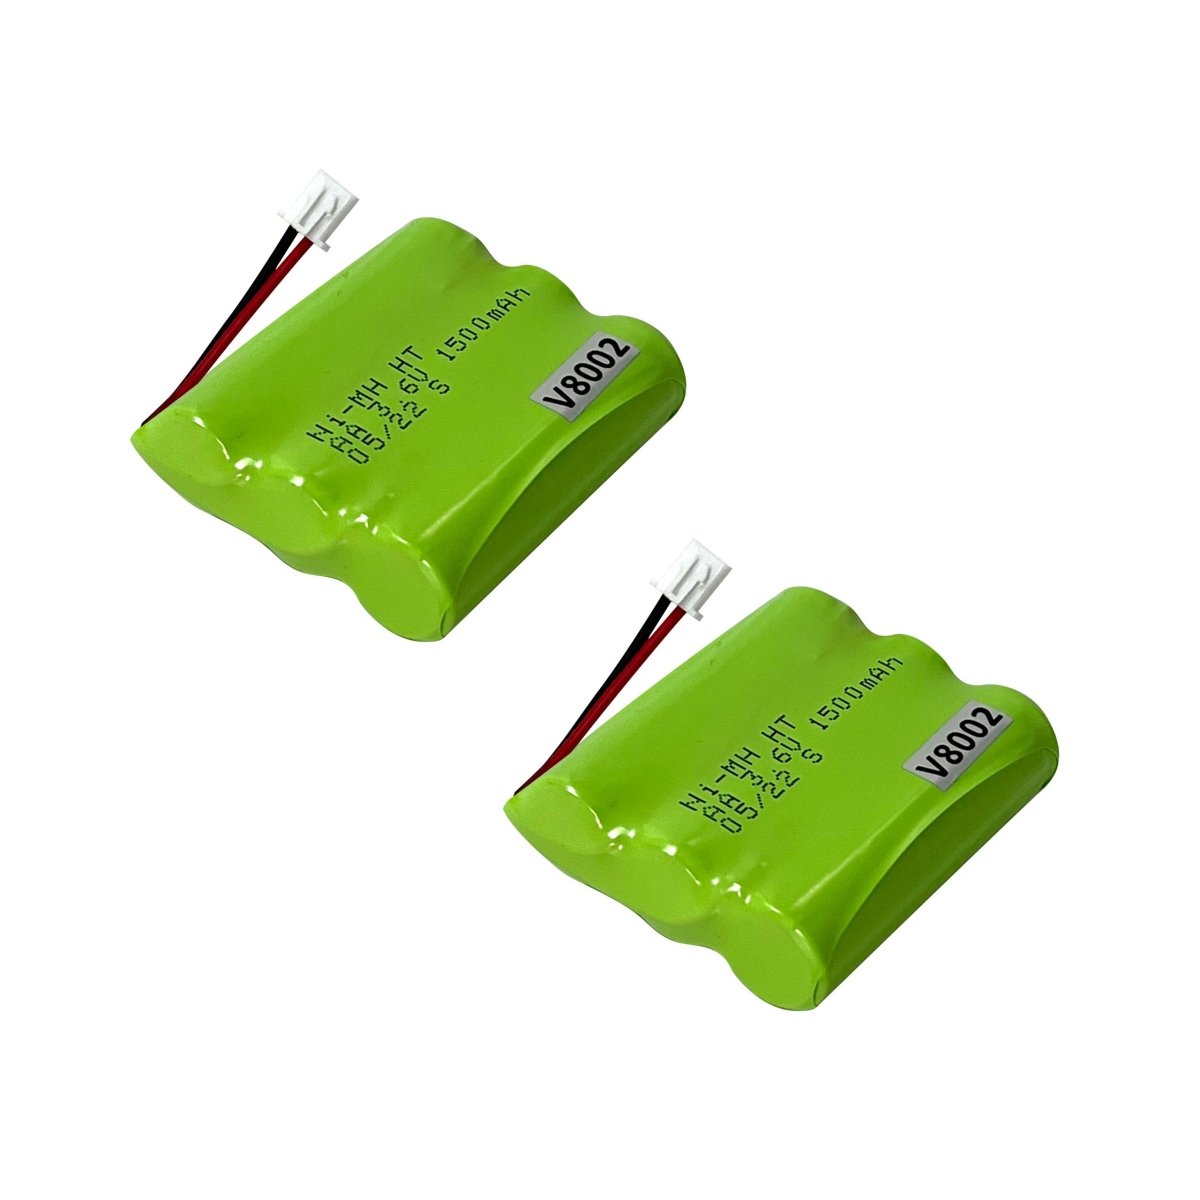 Picture of Nora Lighting NEB-NICAD9 Replacement Battery for Ne-612Ledrc & Horc - 3.6V 1500Mah - Set of 2